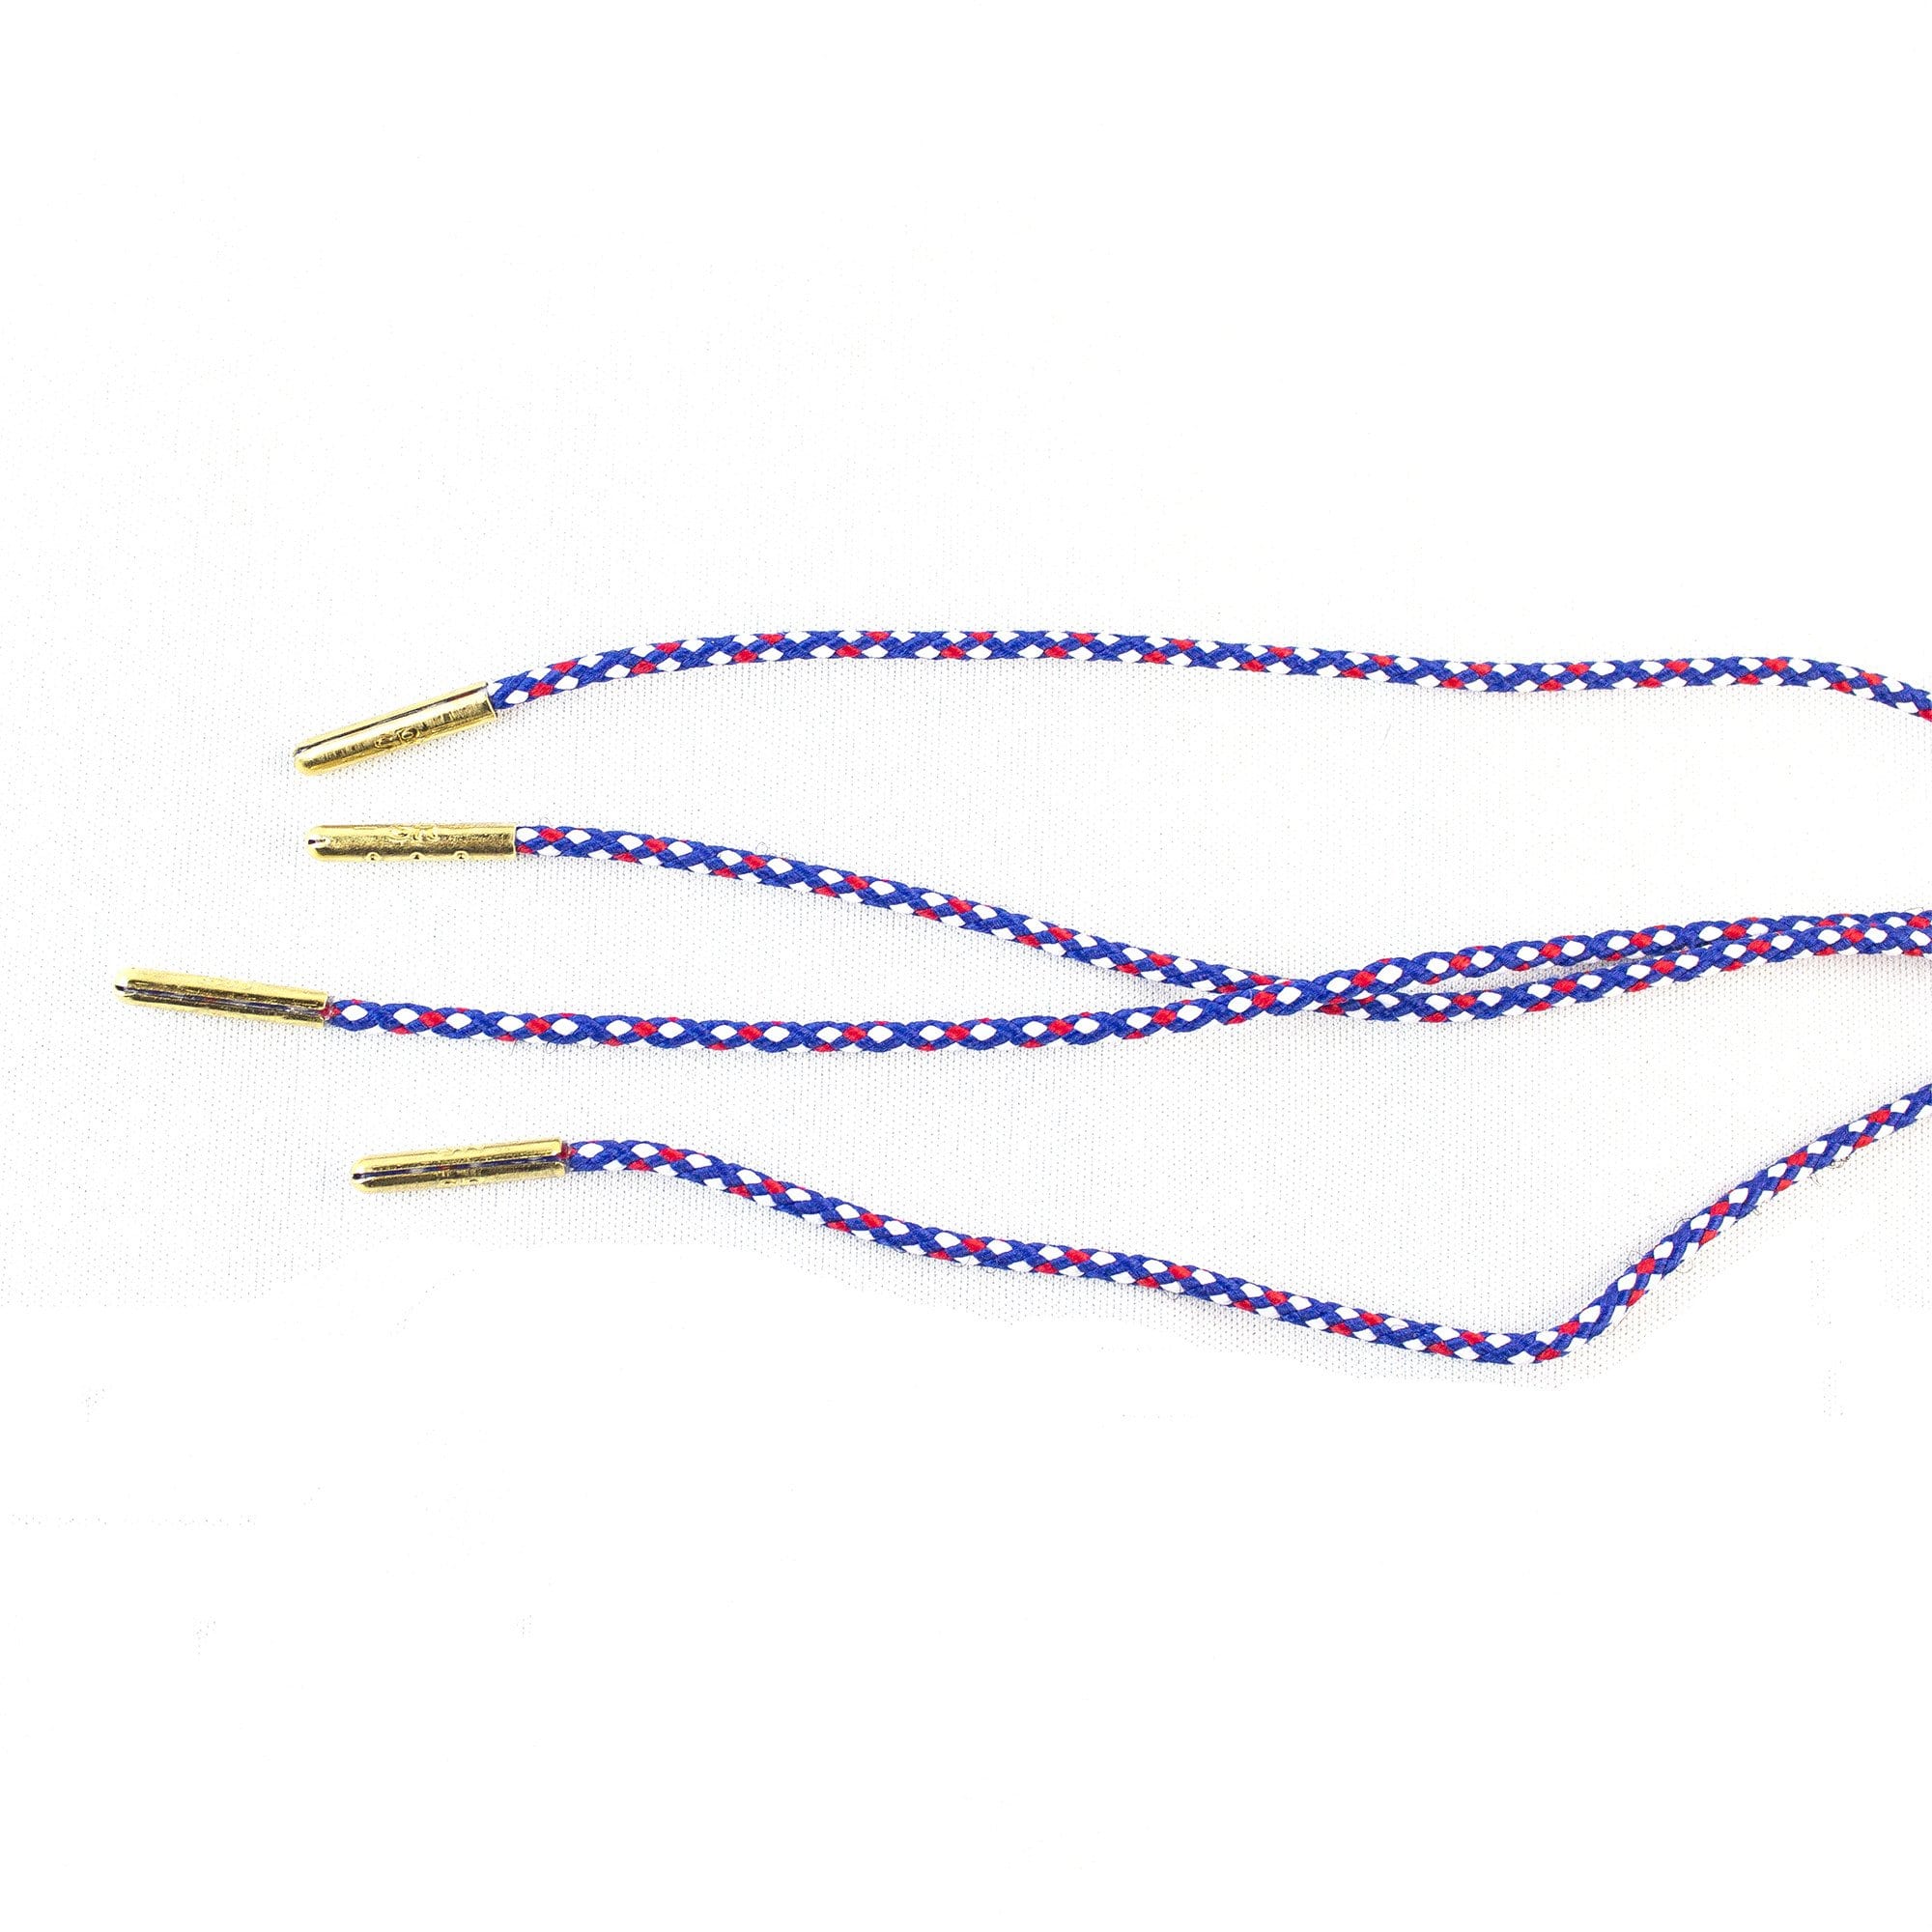 Blue, red and white laces for dress shoes, Length: 27"/69cm-Stolen Riches